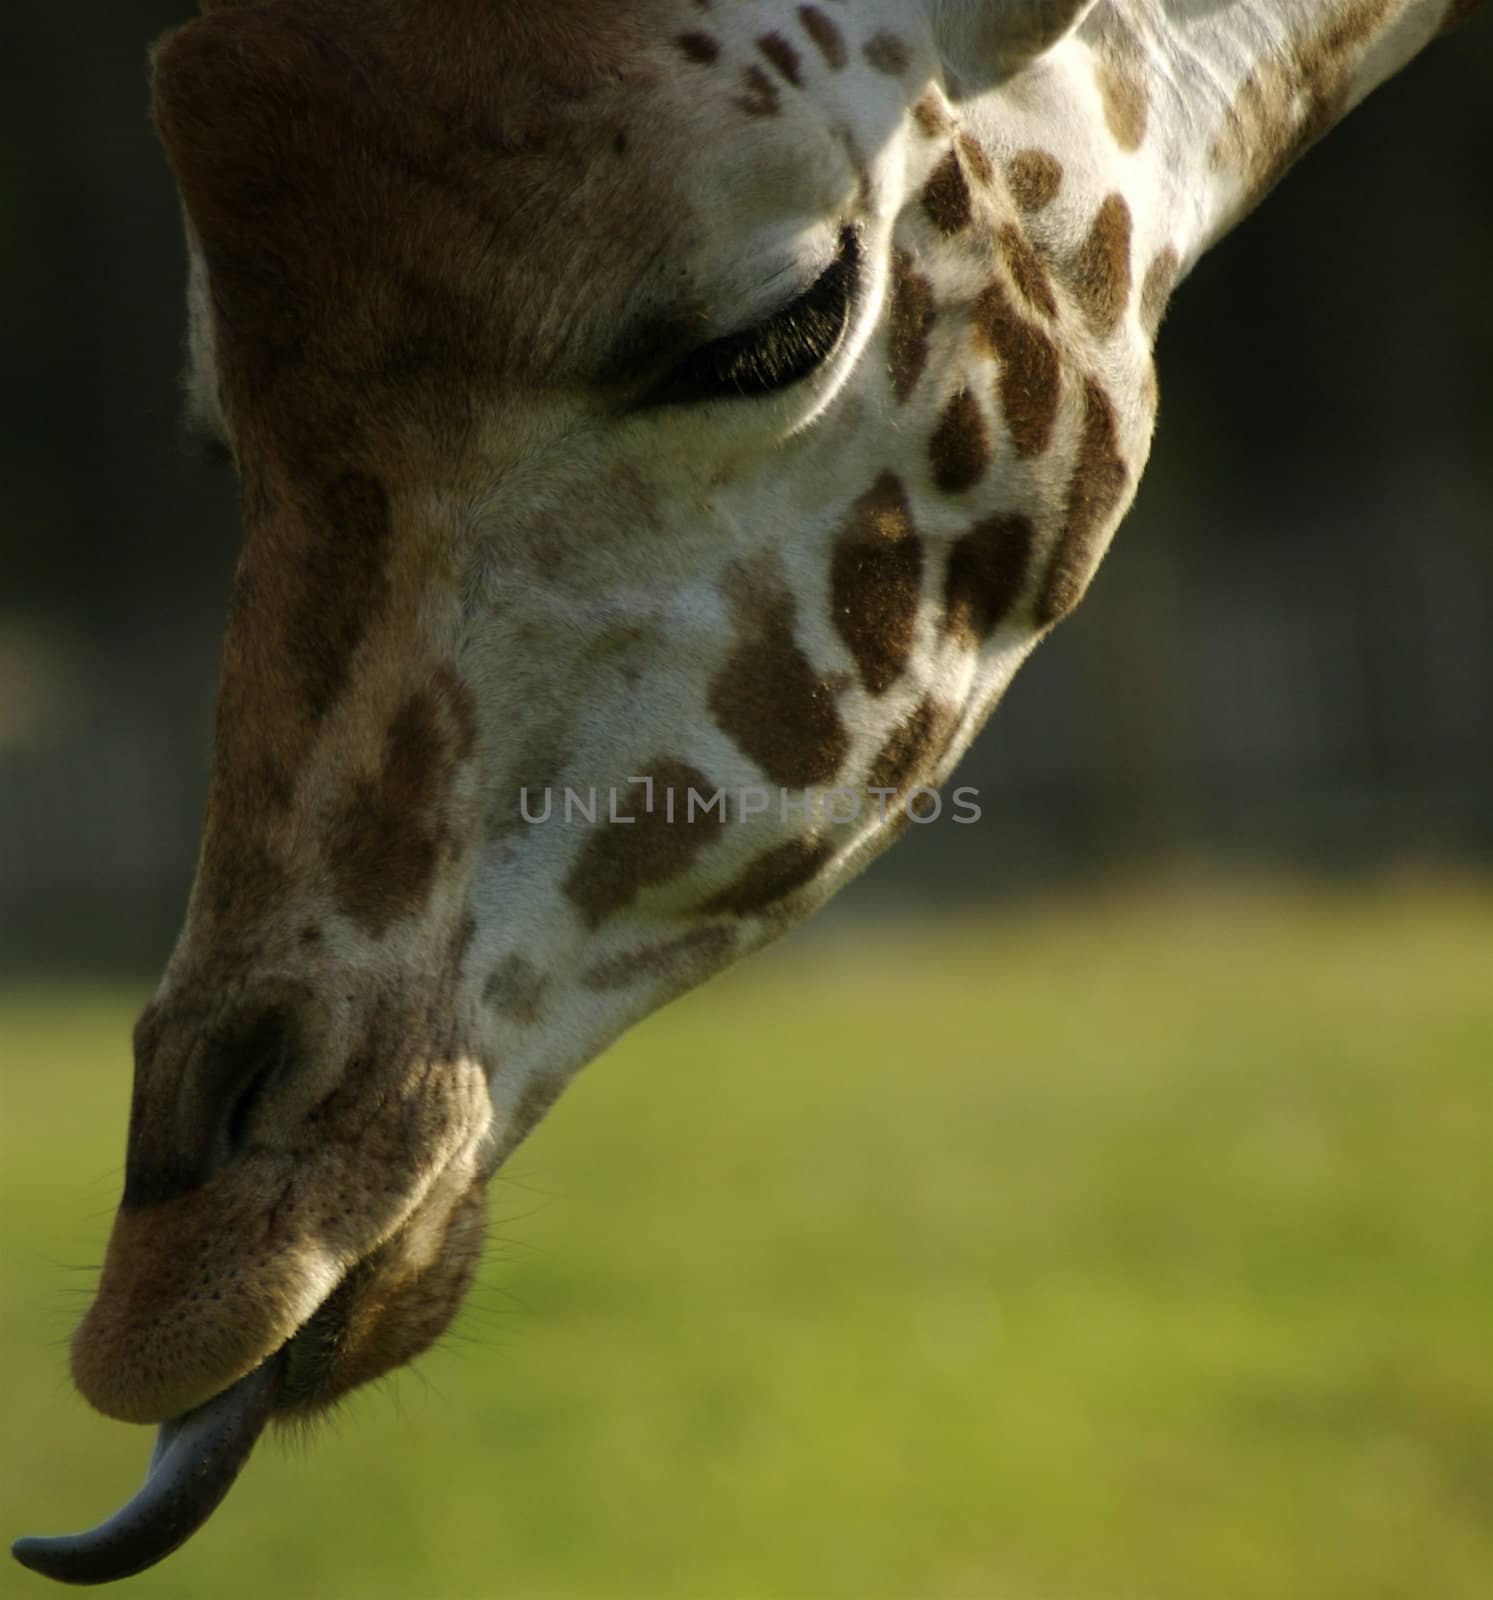 Close up of Giraffe's head, showing it's face in profile with left eye....and it's tongue out.